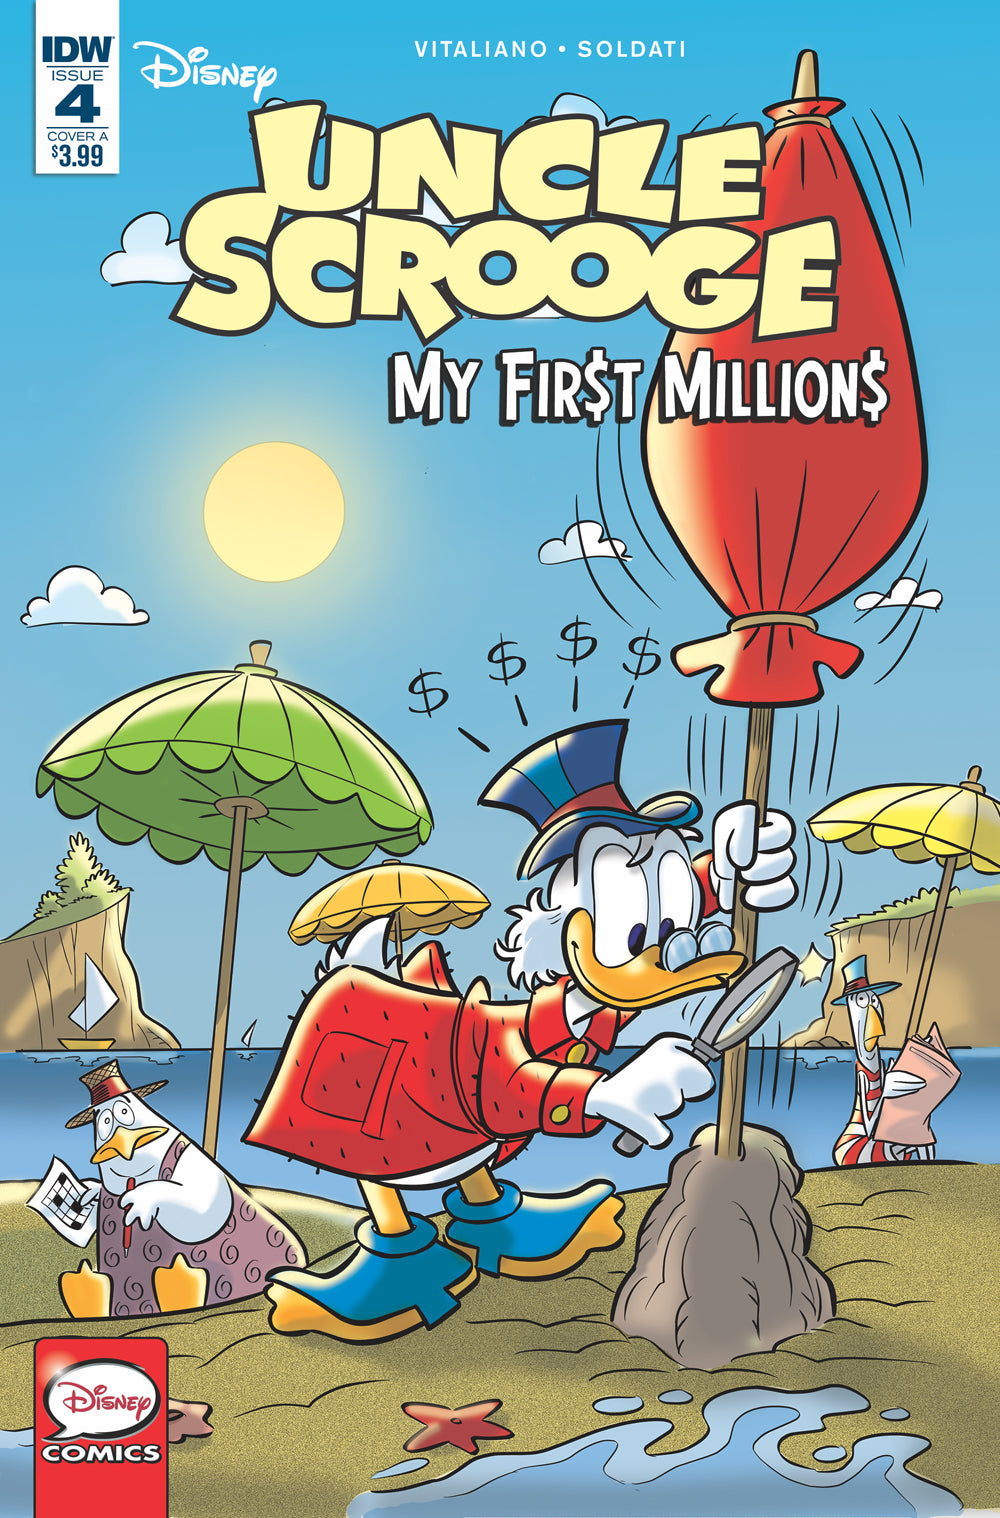 UNCLE SCROOGE MY FIRST MILLIONS #4